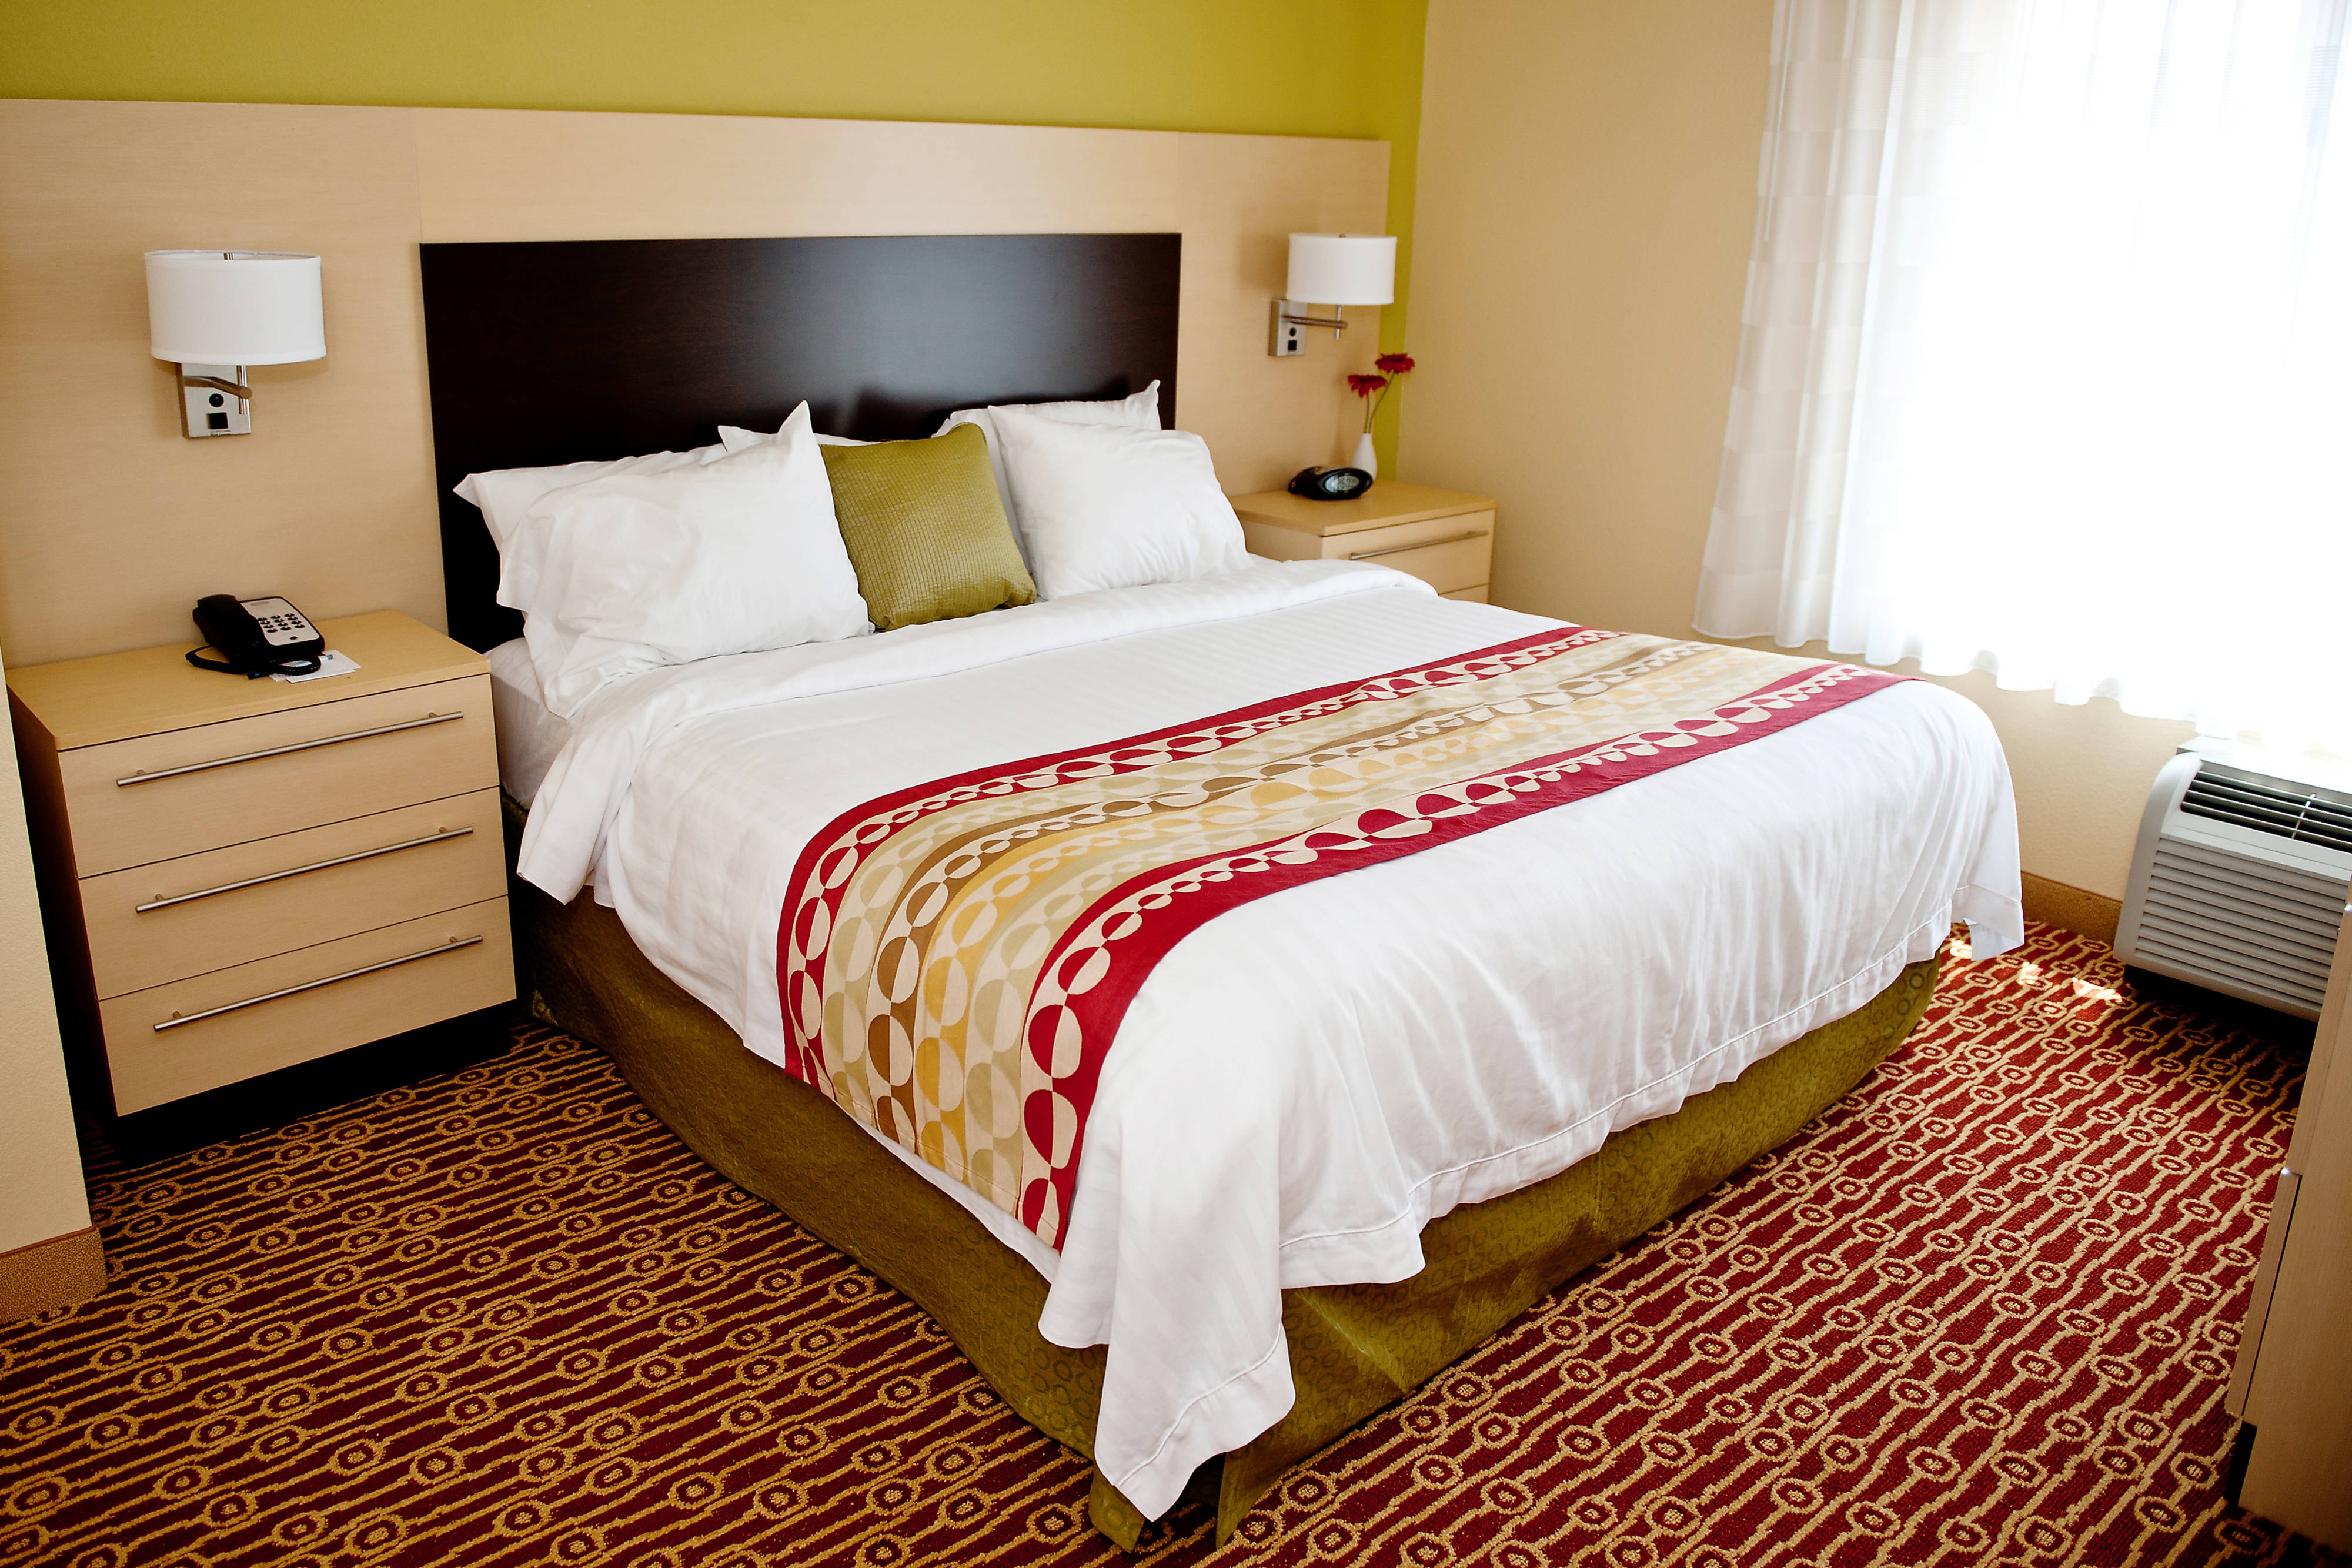 Mooresville, NC hotel TownePlace Suites Charlotte Mooresville, apartmentstyle suites in Race